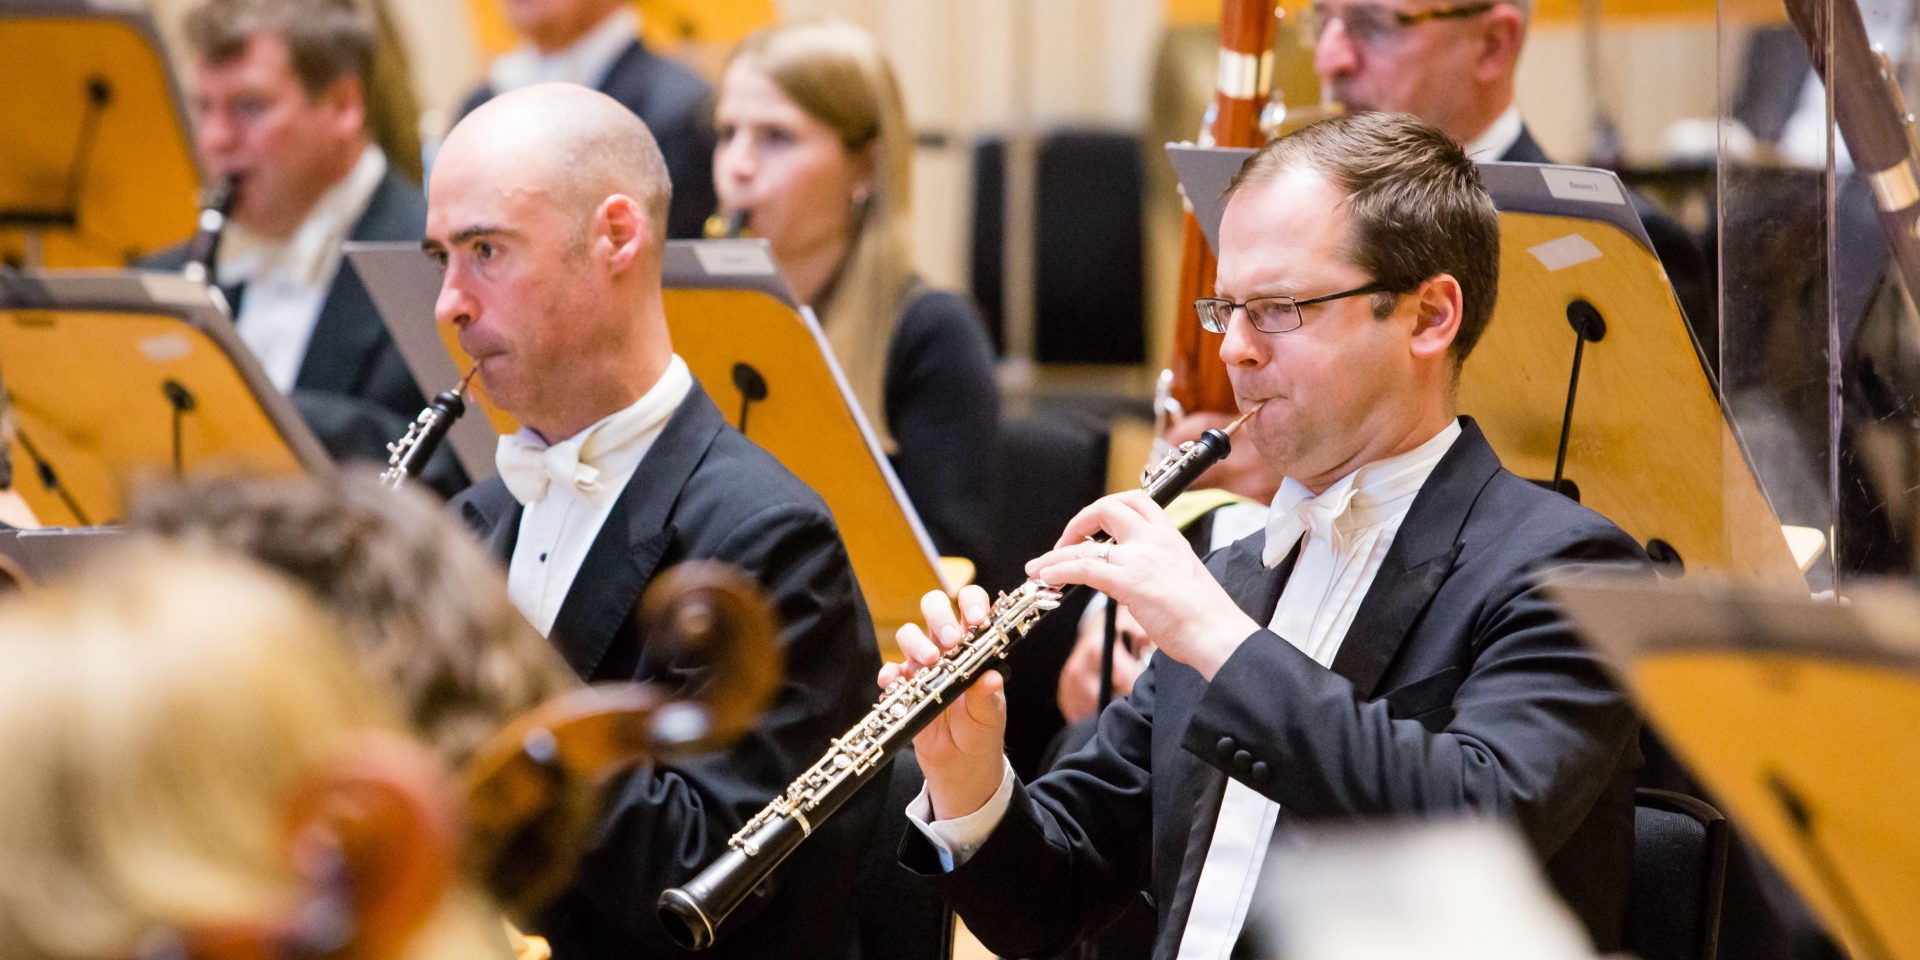 RSNO Season Update: artist and repertoire changes for this week’s concerts